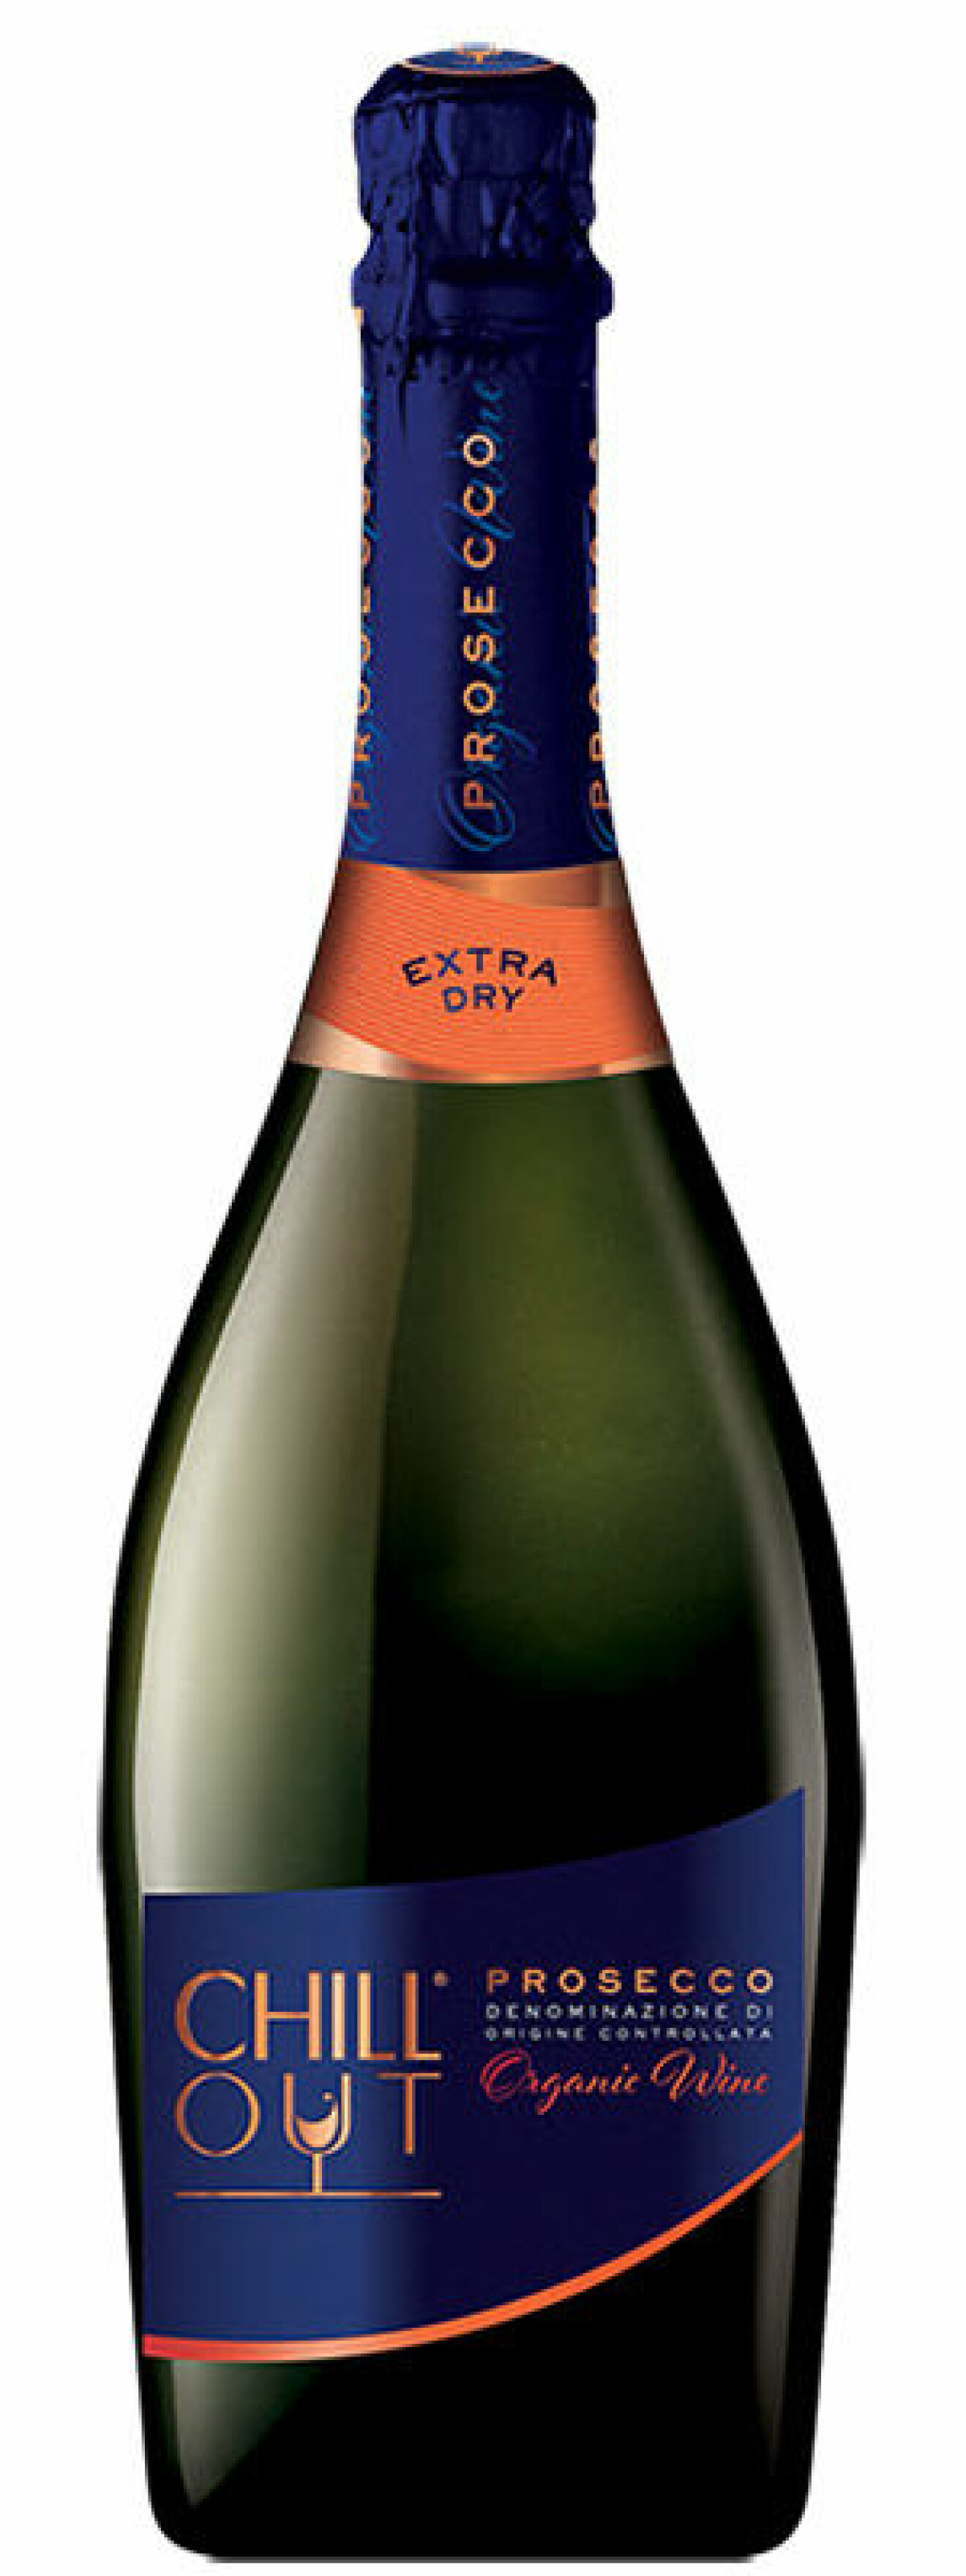 Chill Out Prosecco (nr 77088) kostar 89 kr.